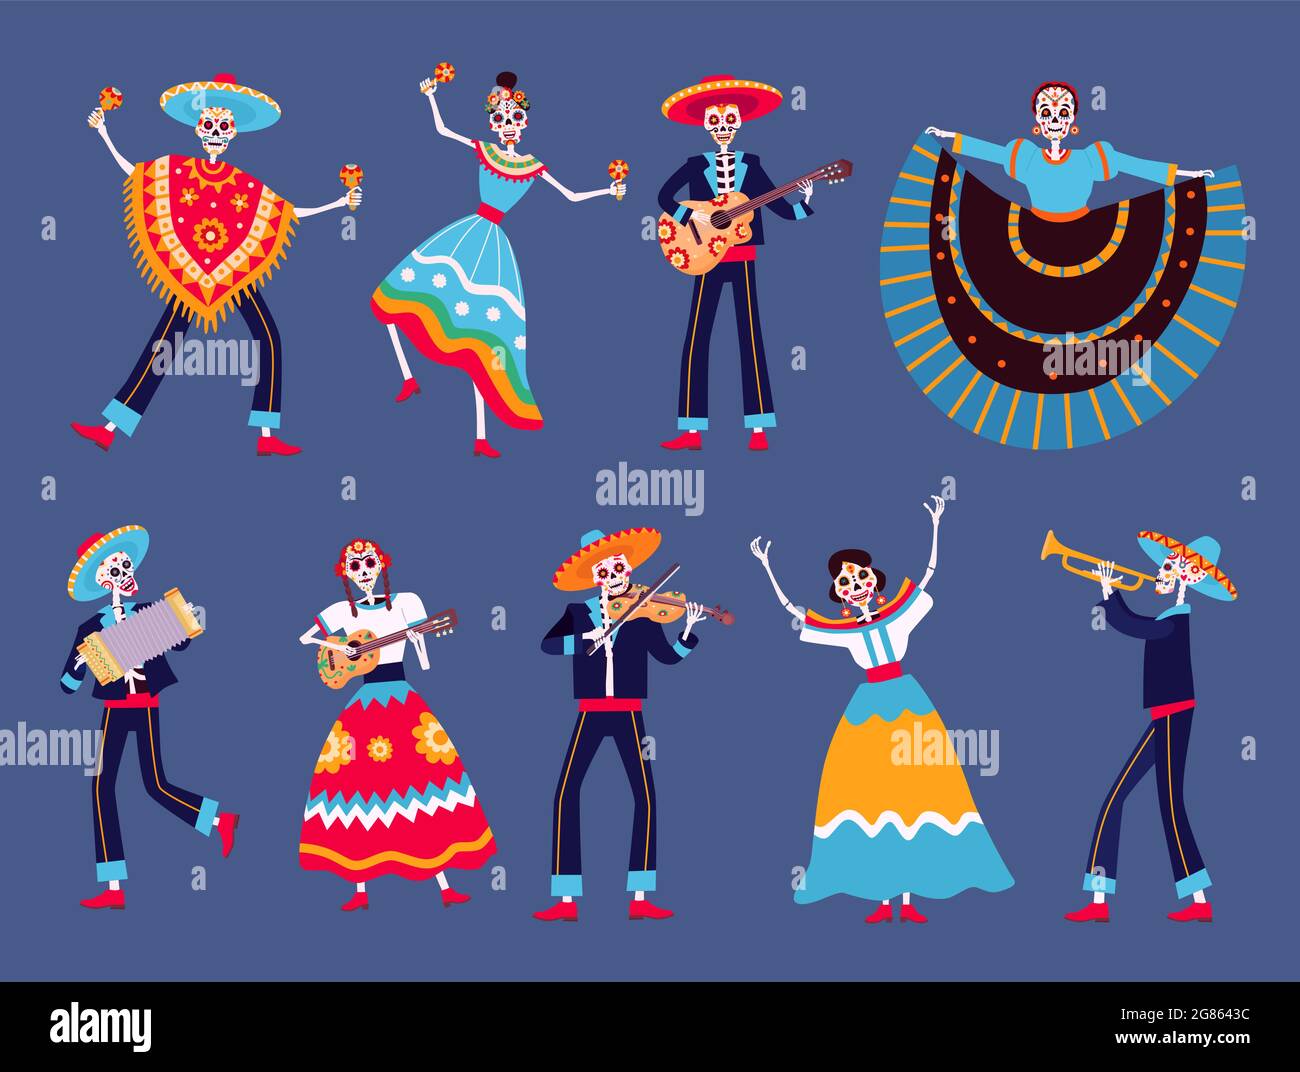 Day of dead skeletons. Mexican dia de los muertos skeleton dancers characters. Catrina, mariachi musicians skeletons with guitar vector set Stock Vector